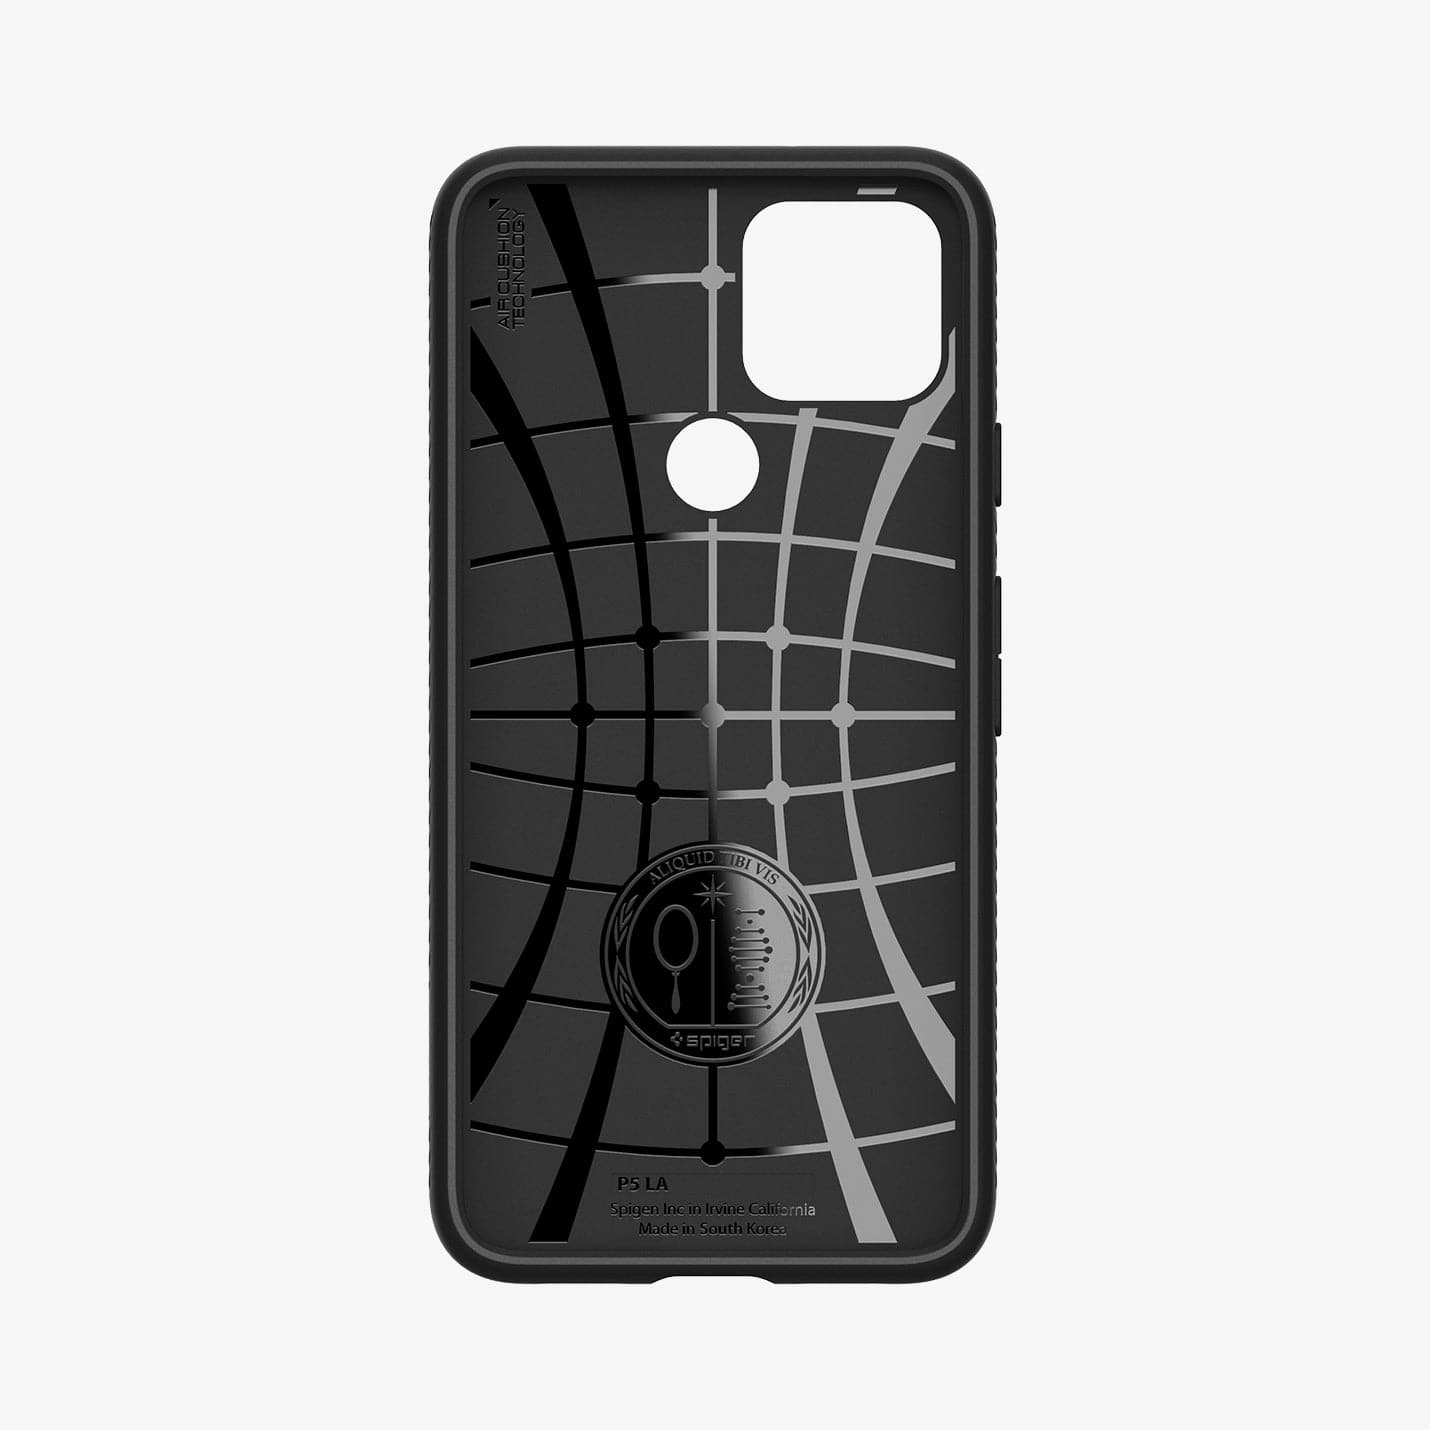 ACS01896 - Pixel 5 Case Liquid Air in black showing the inside of case